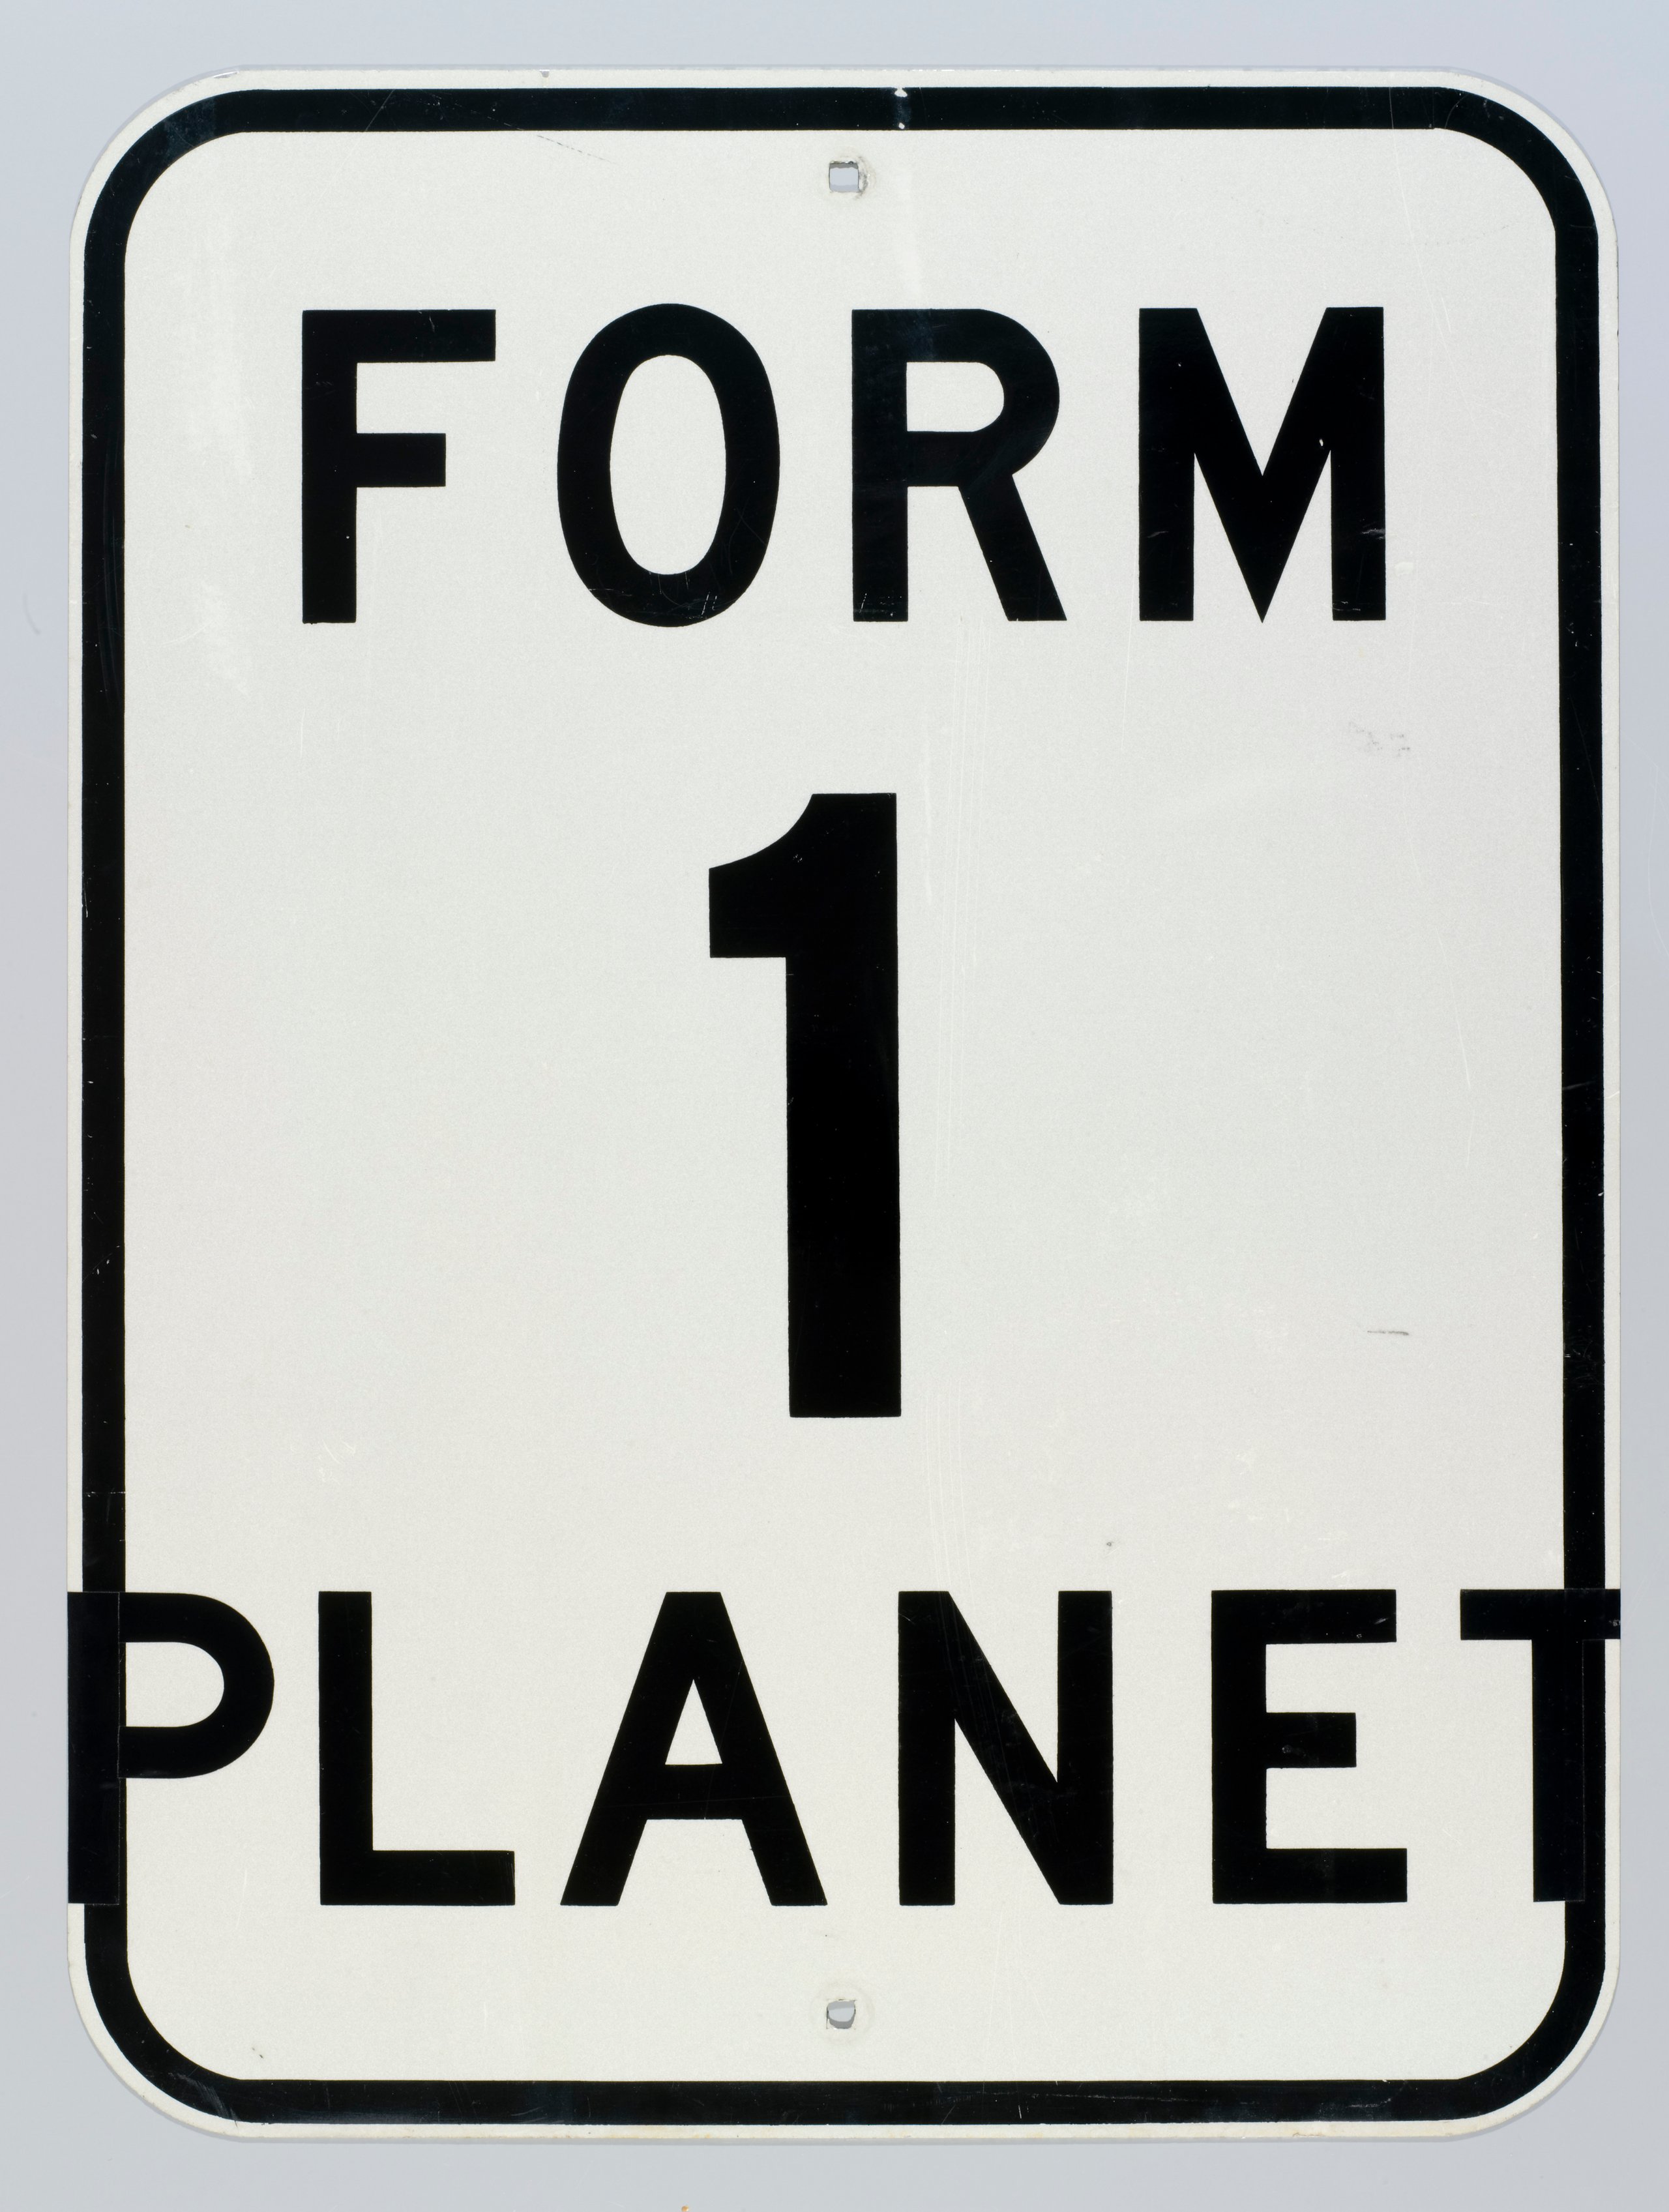 Manipulated road sign